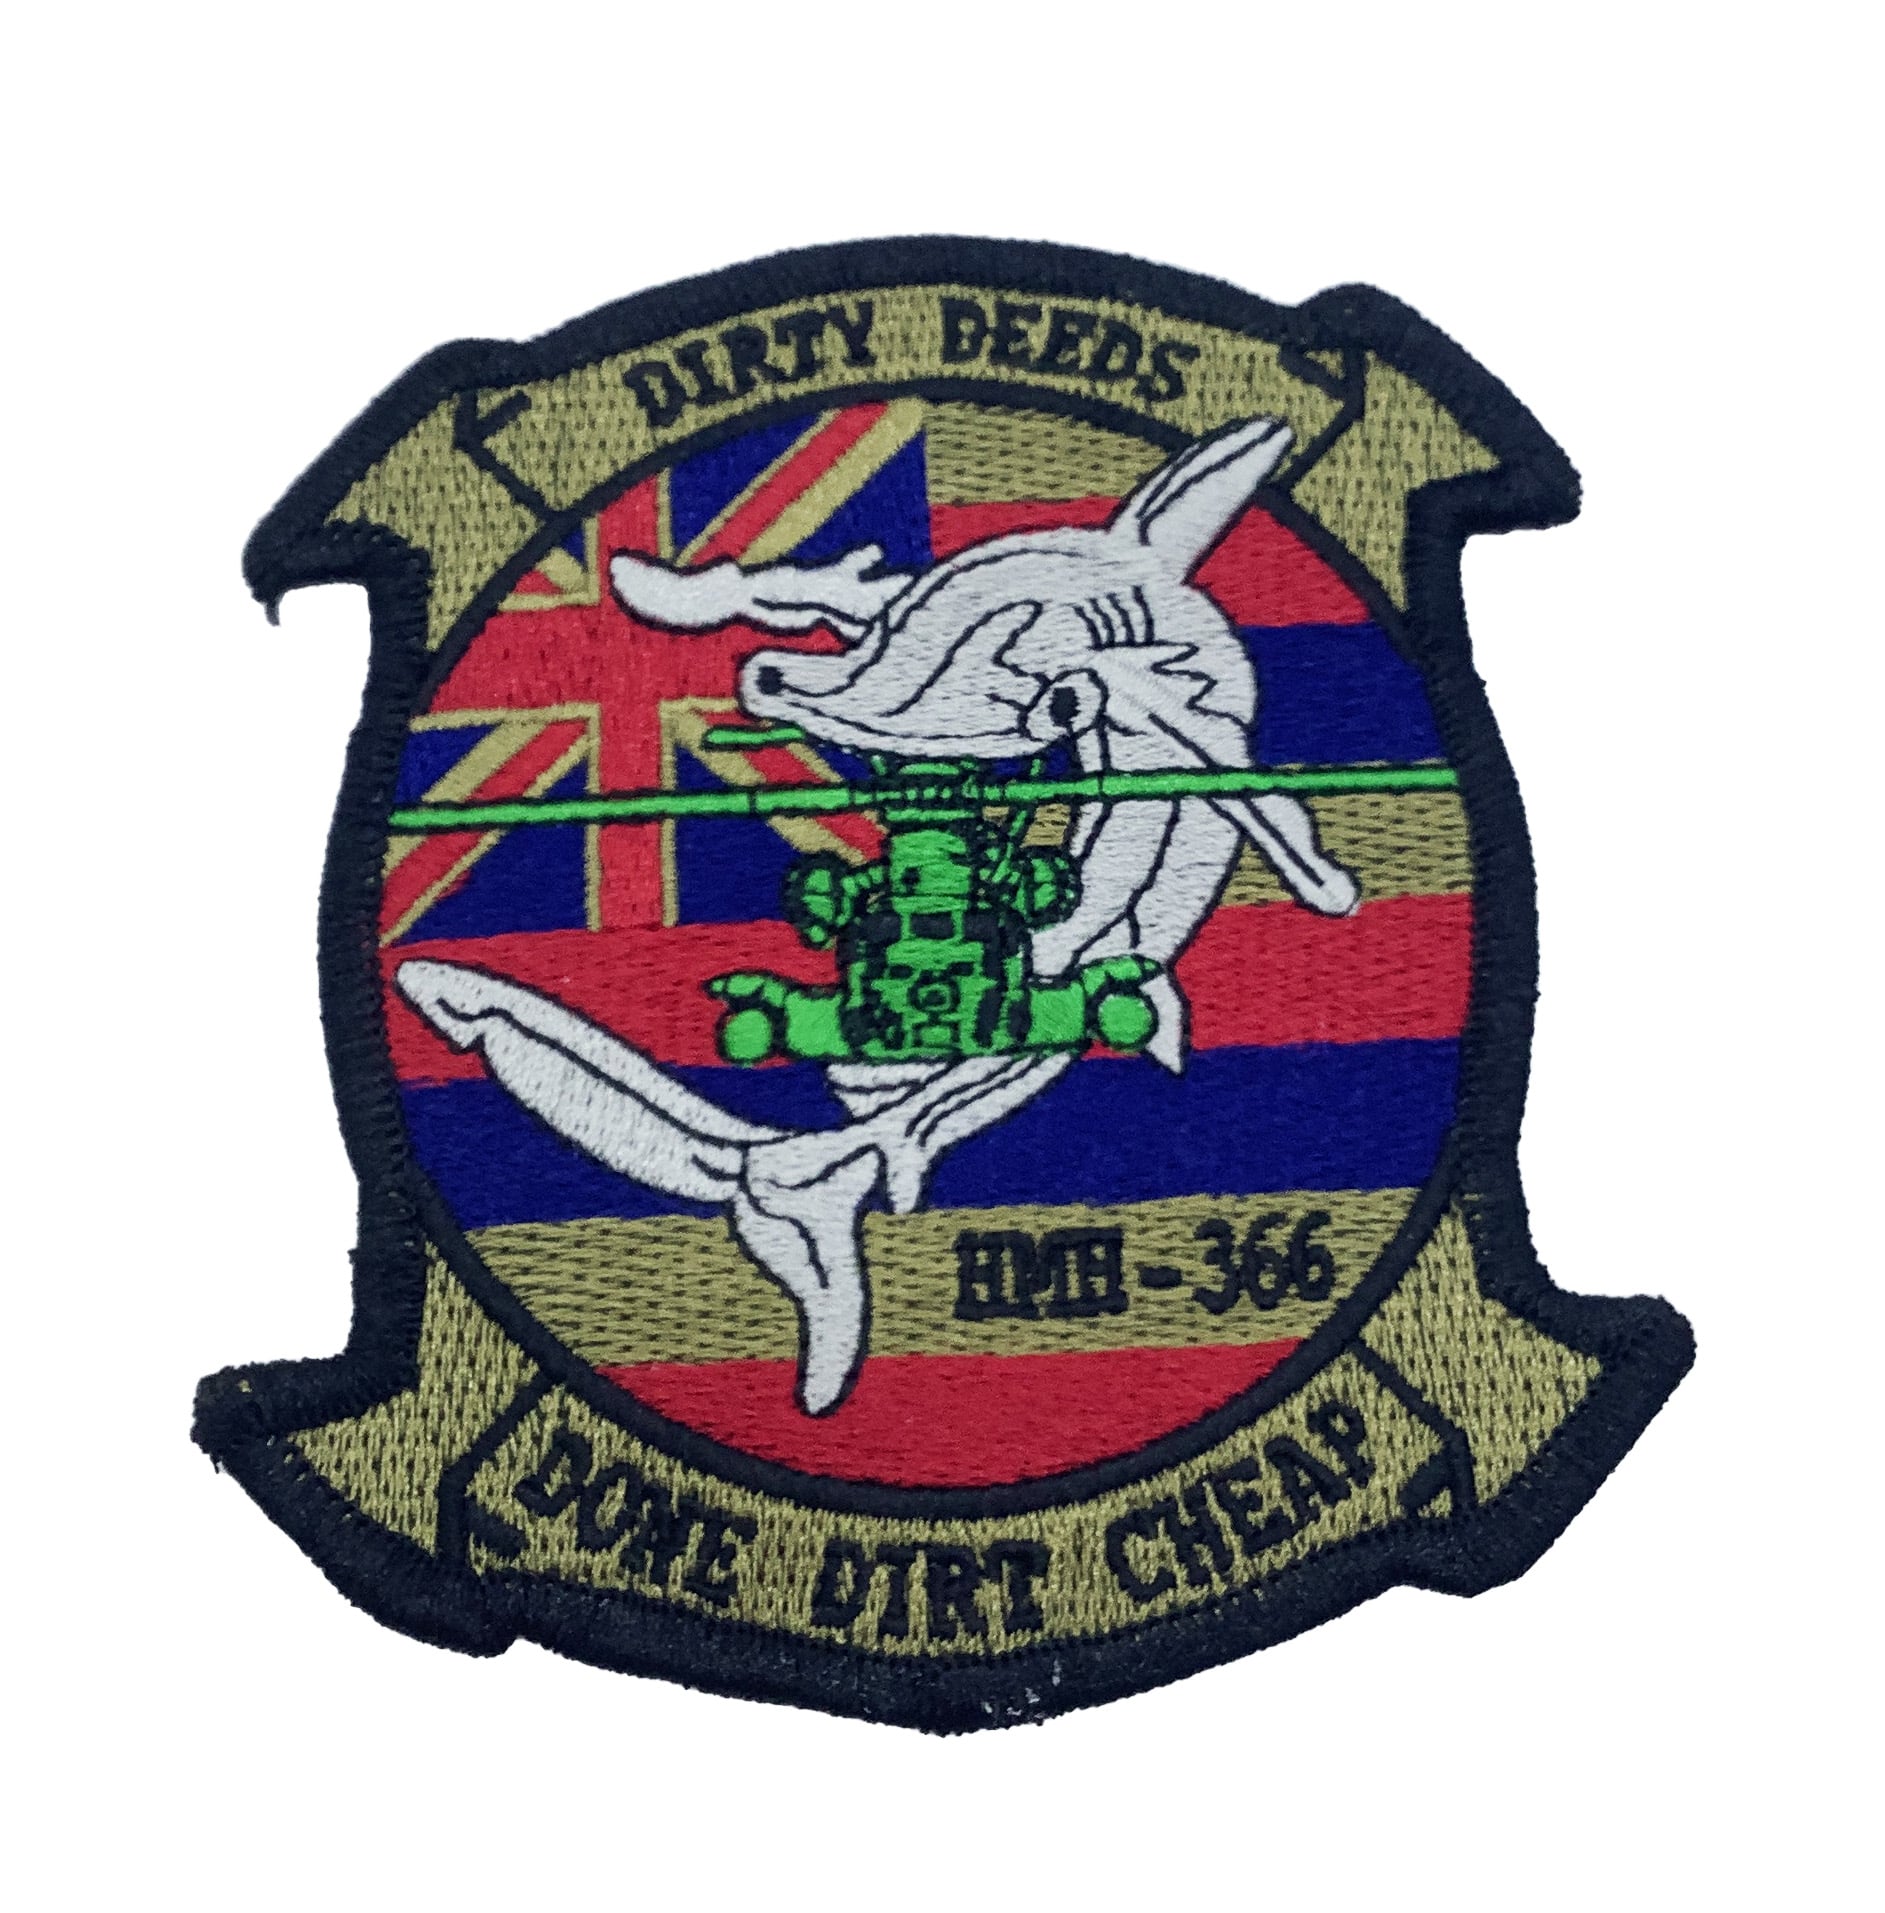 HMH-366 Dirty Deeds Patch – No Hook and Loop